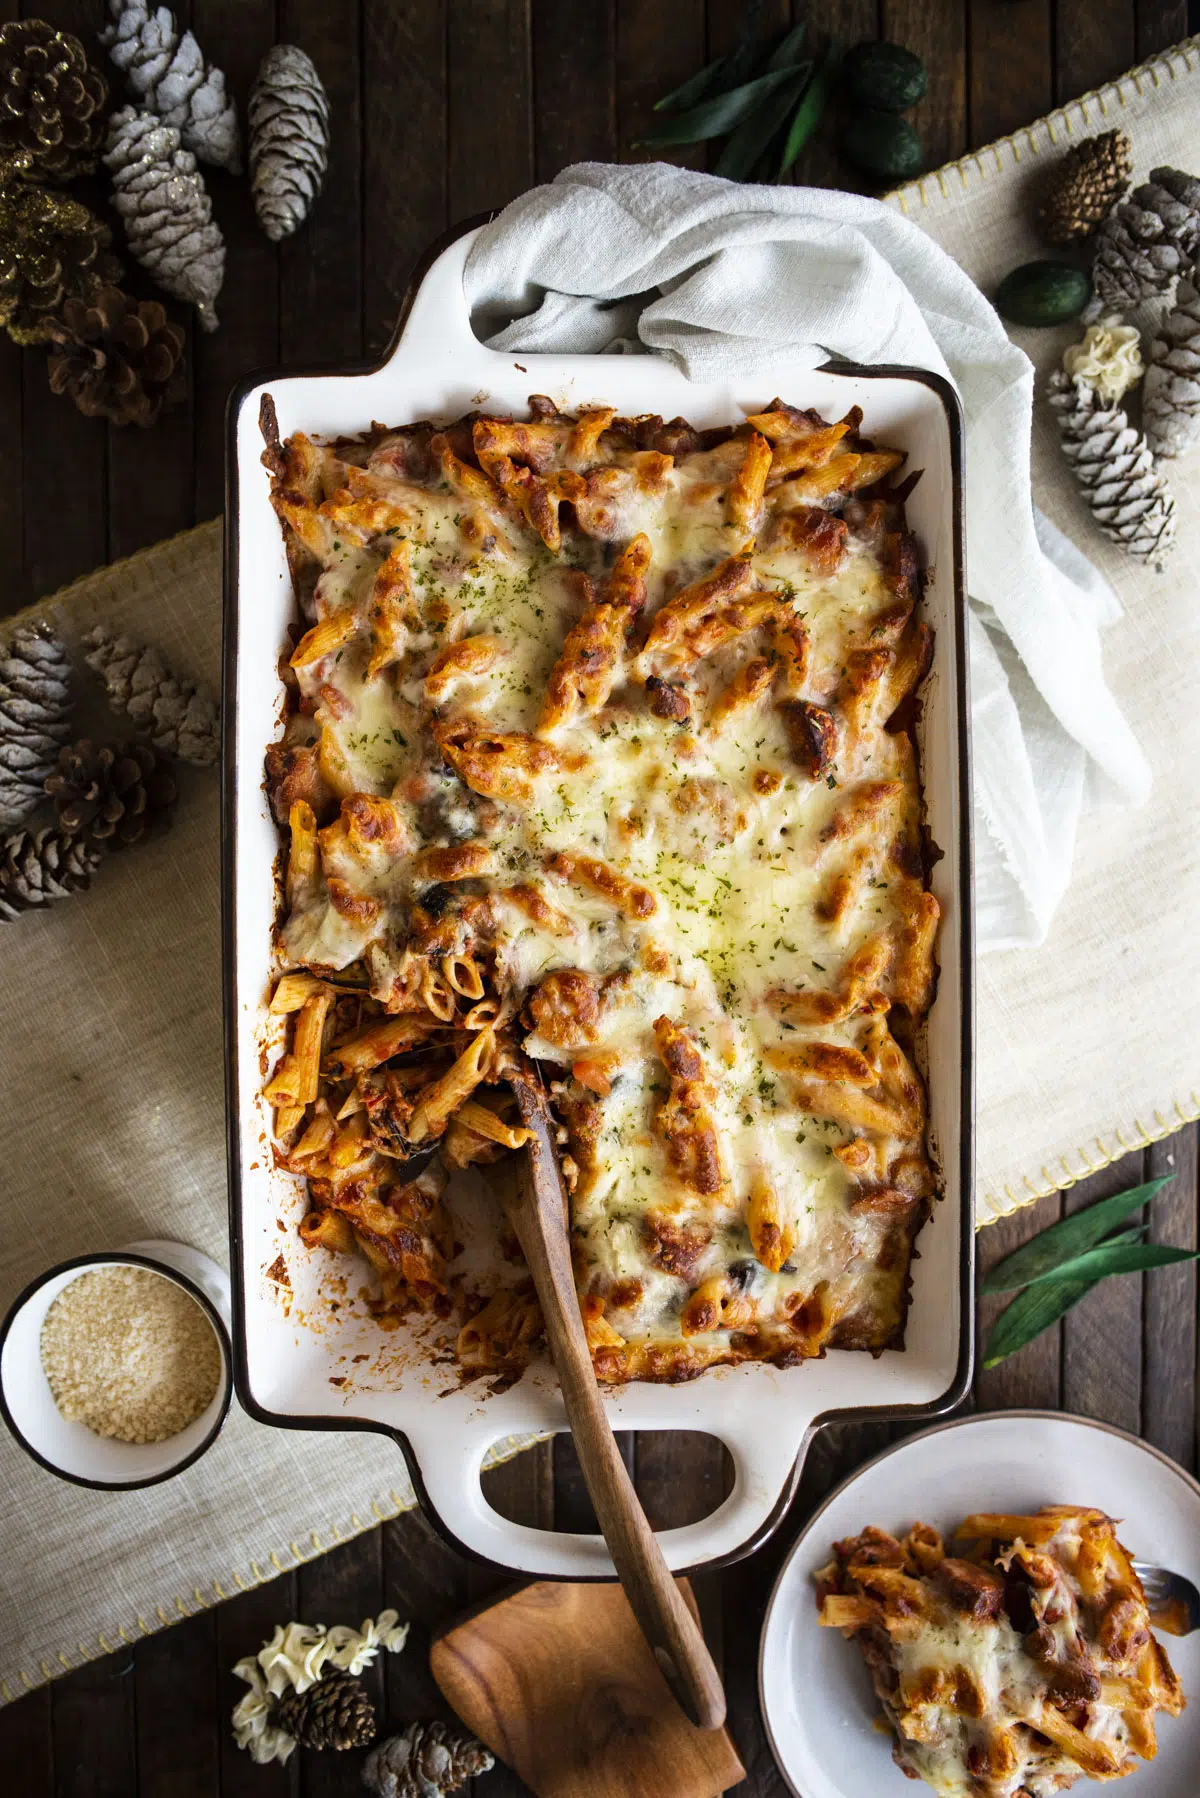 Baked Ziti with Eggplant & Chicken Sausage